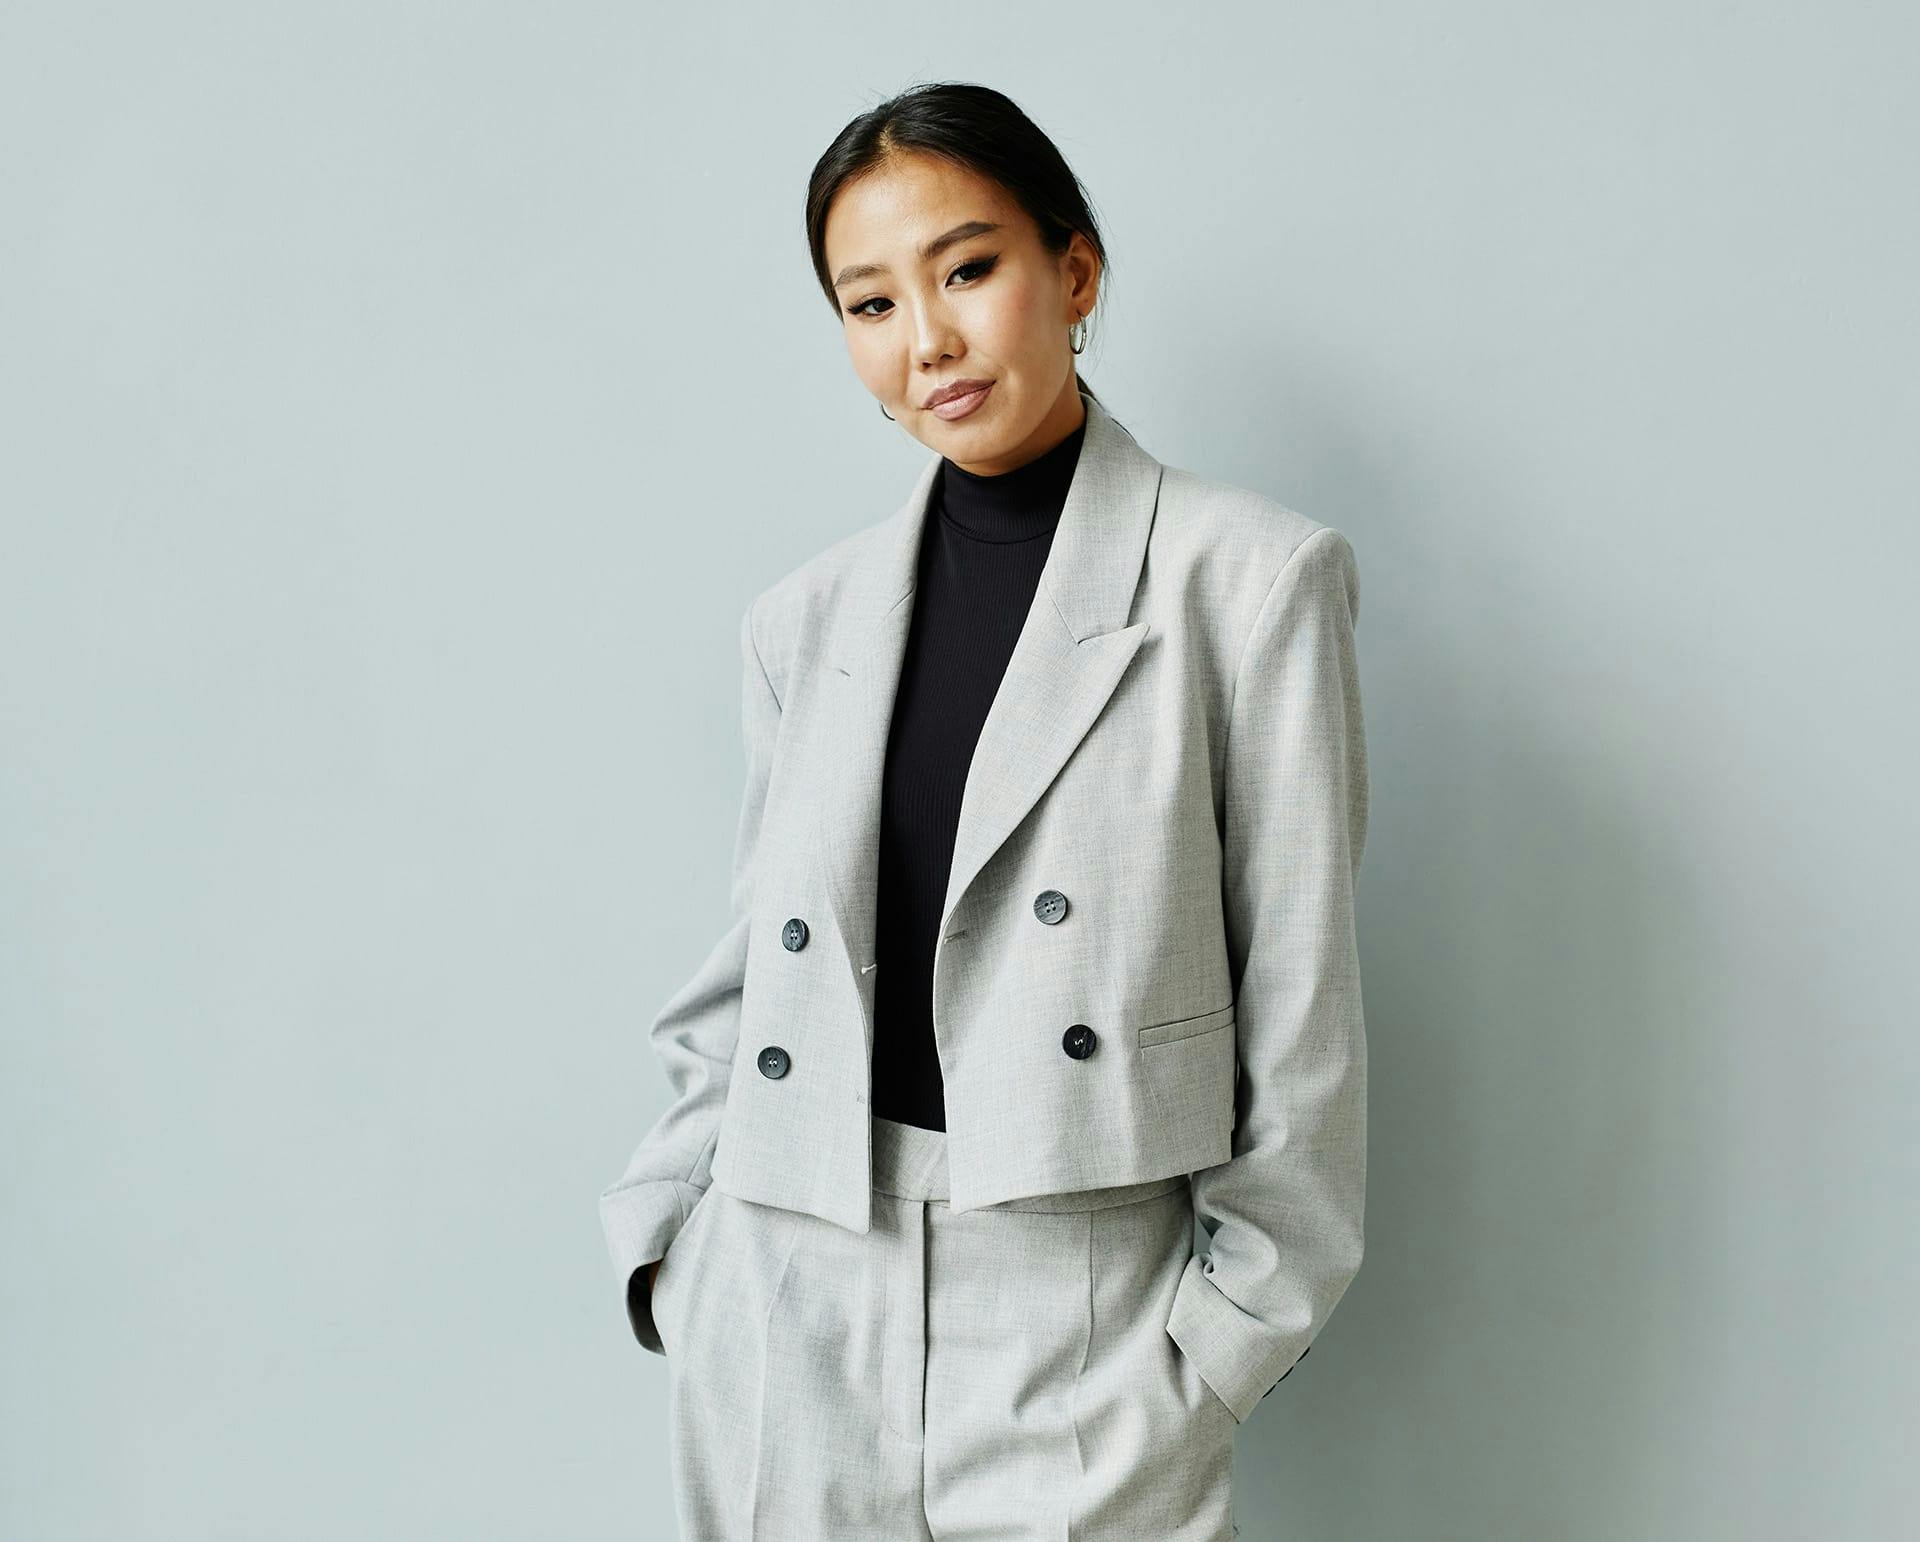 Woman in grey suit